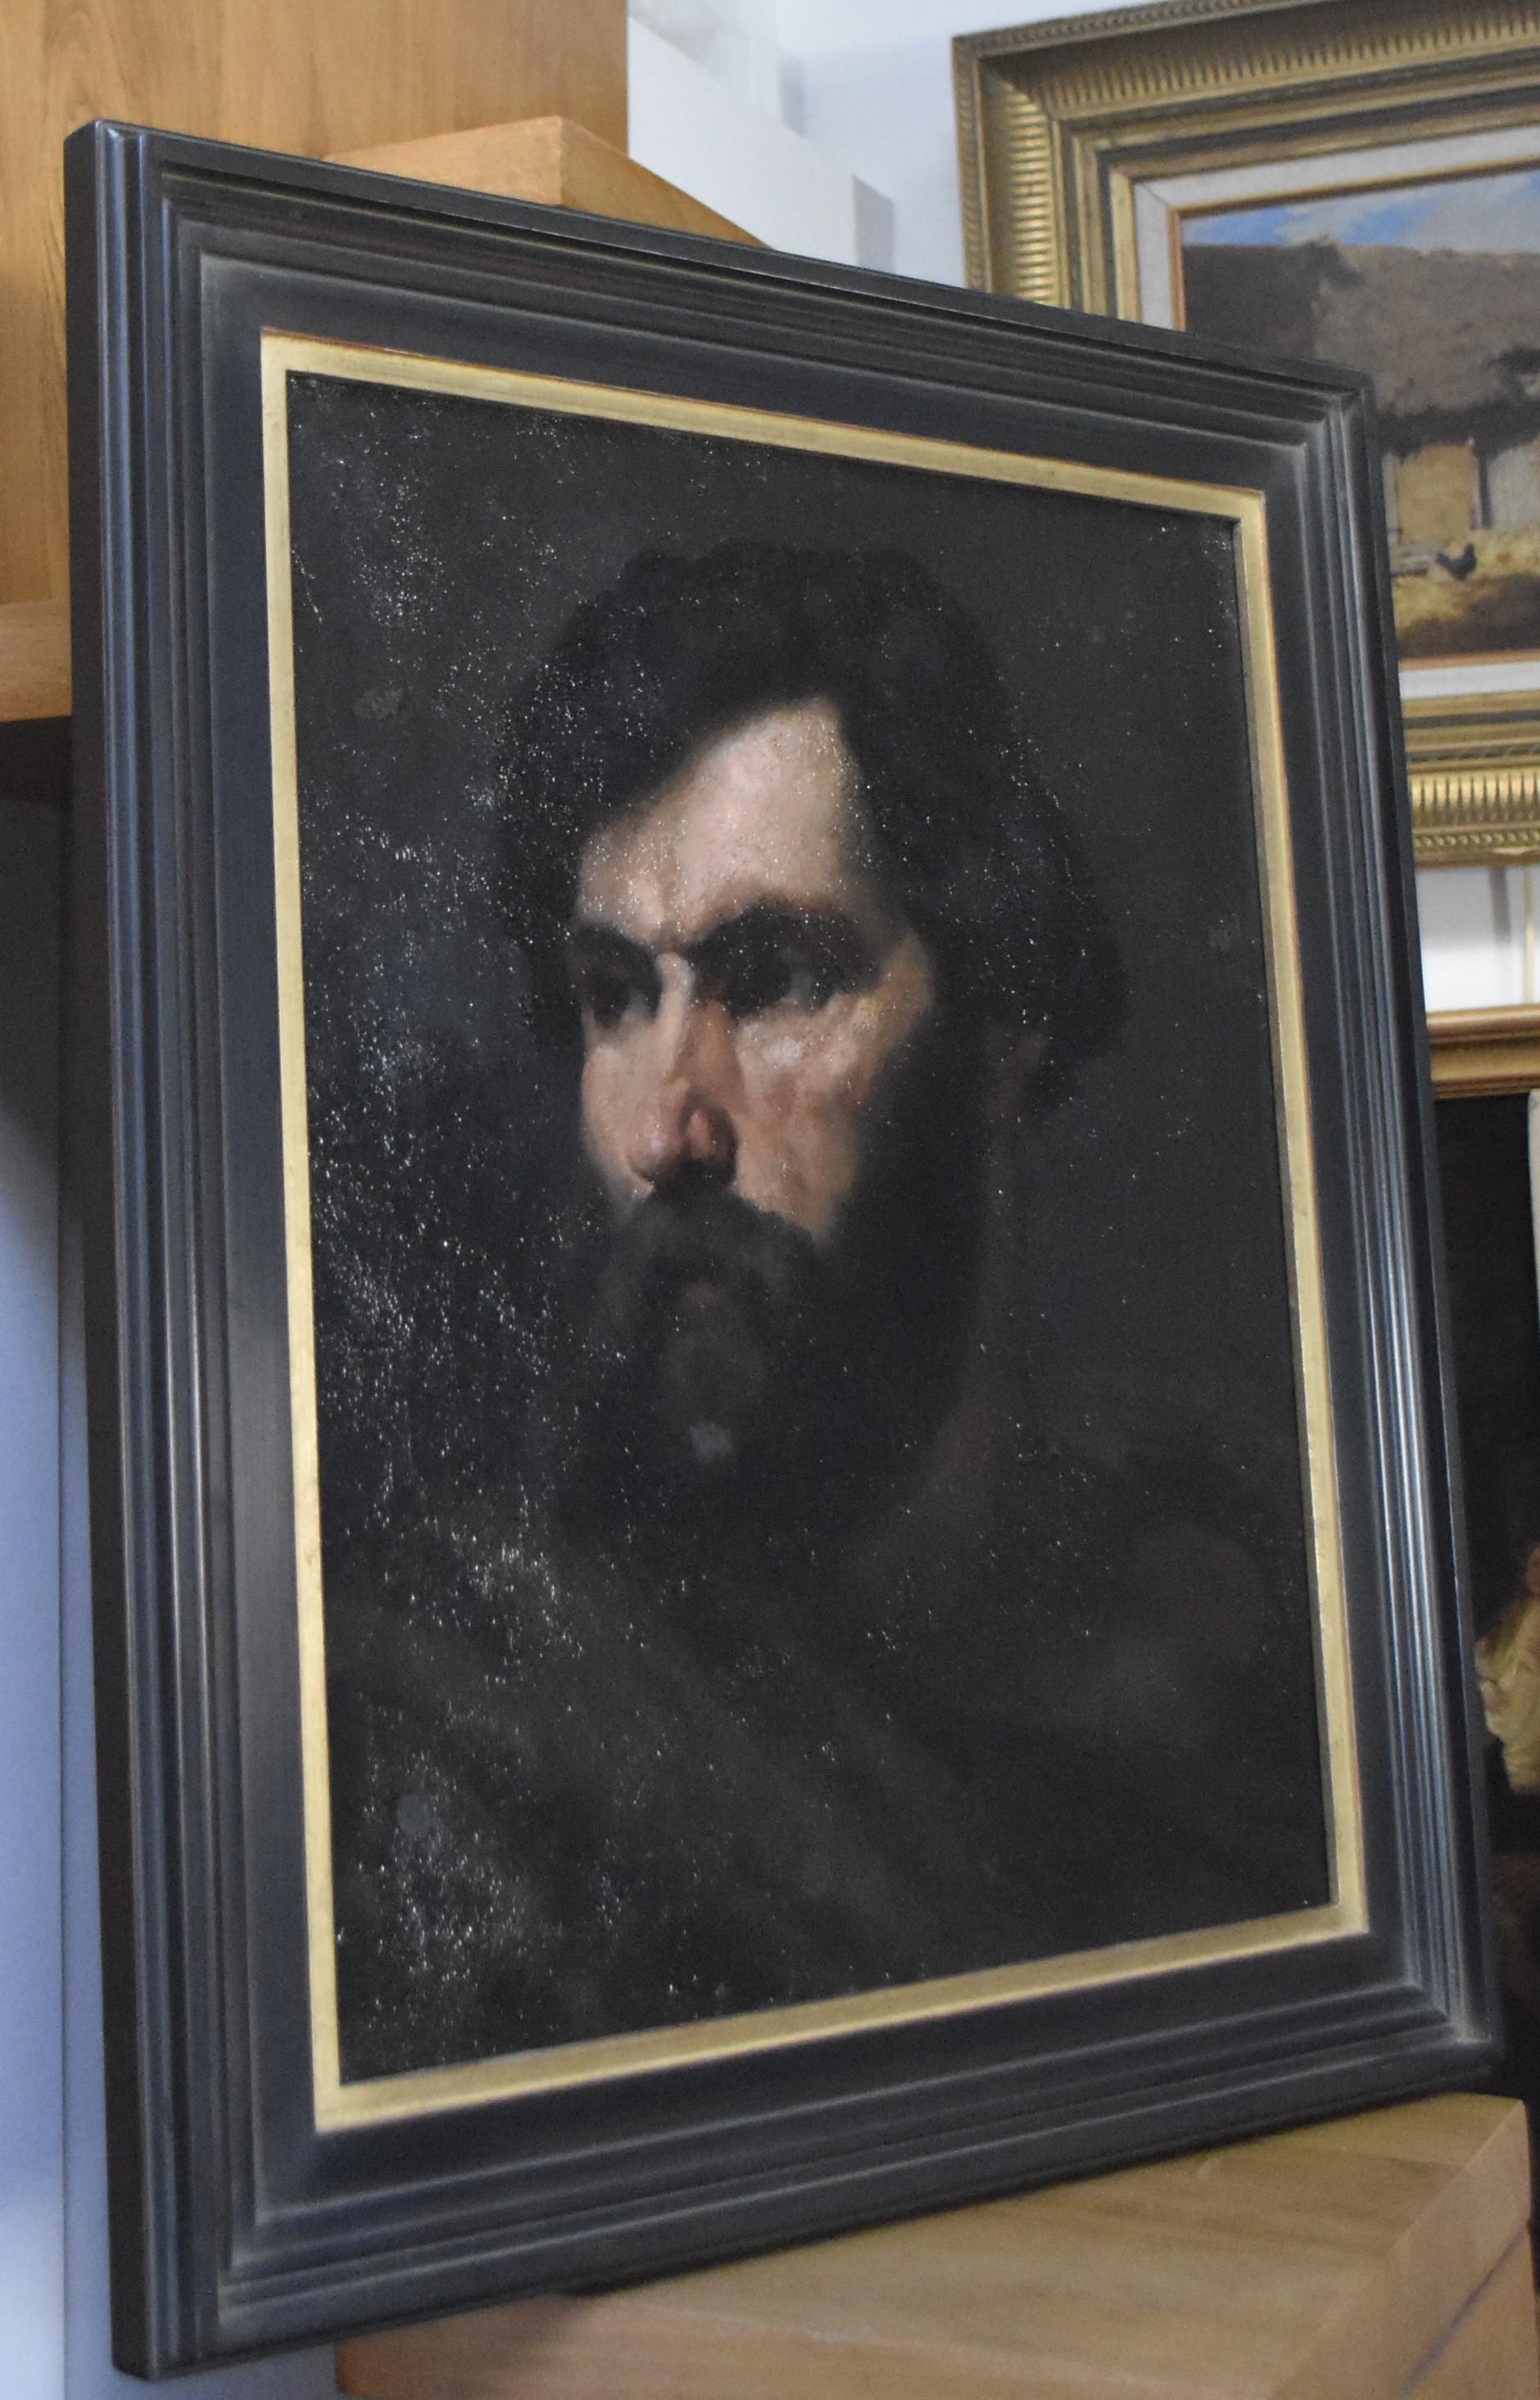 French Romantic School
19th Century
Manly head of bearded man
oil on canvas
46 x 37.8 cm
In fairly good condition, some inpaintings visible under UV light, mainly in the backgrounds and one in the sitter's beard. 
Under a glossy varnish.

In a nice